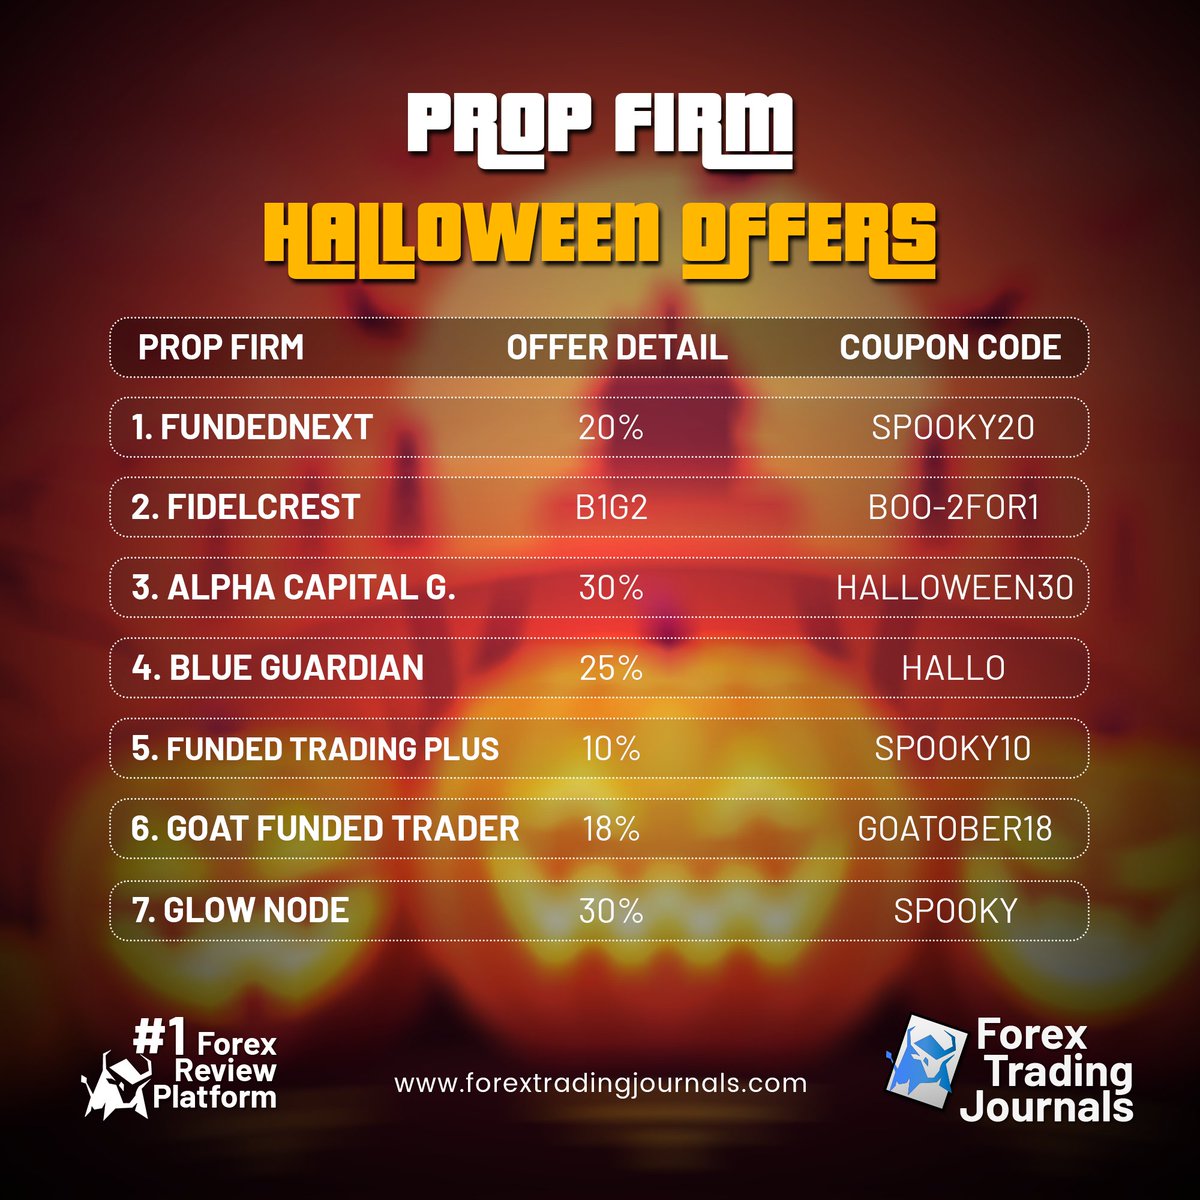 🎃Some Spooktacular Offers by Forex Prop Firms this #Halloween

#PumpkinCarving #October31 #Halloween2023 #proptrading #tradingoffers #fundednext #fidelcrest #blueguardian #fundedtradingplus #forextrading #eurusd #gbpusd #usdjpy #audjpy #USDCAD #forextrader #glownode